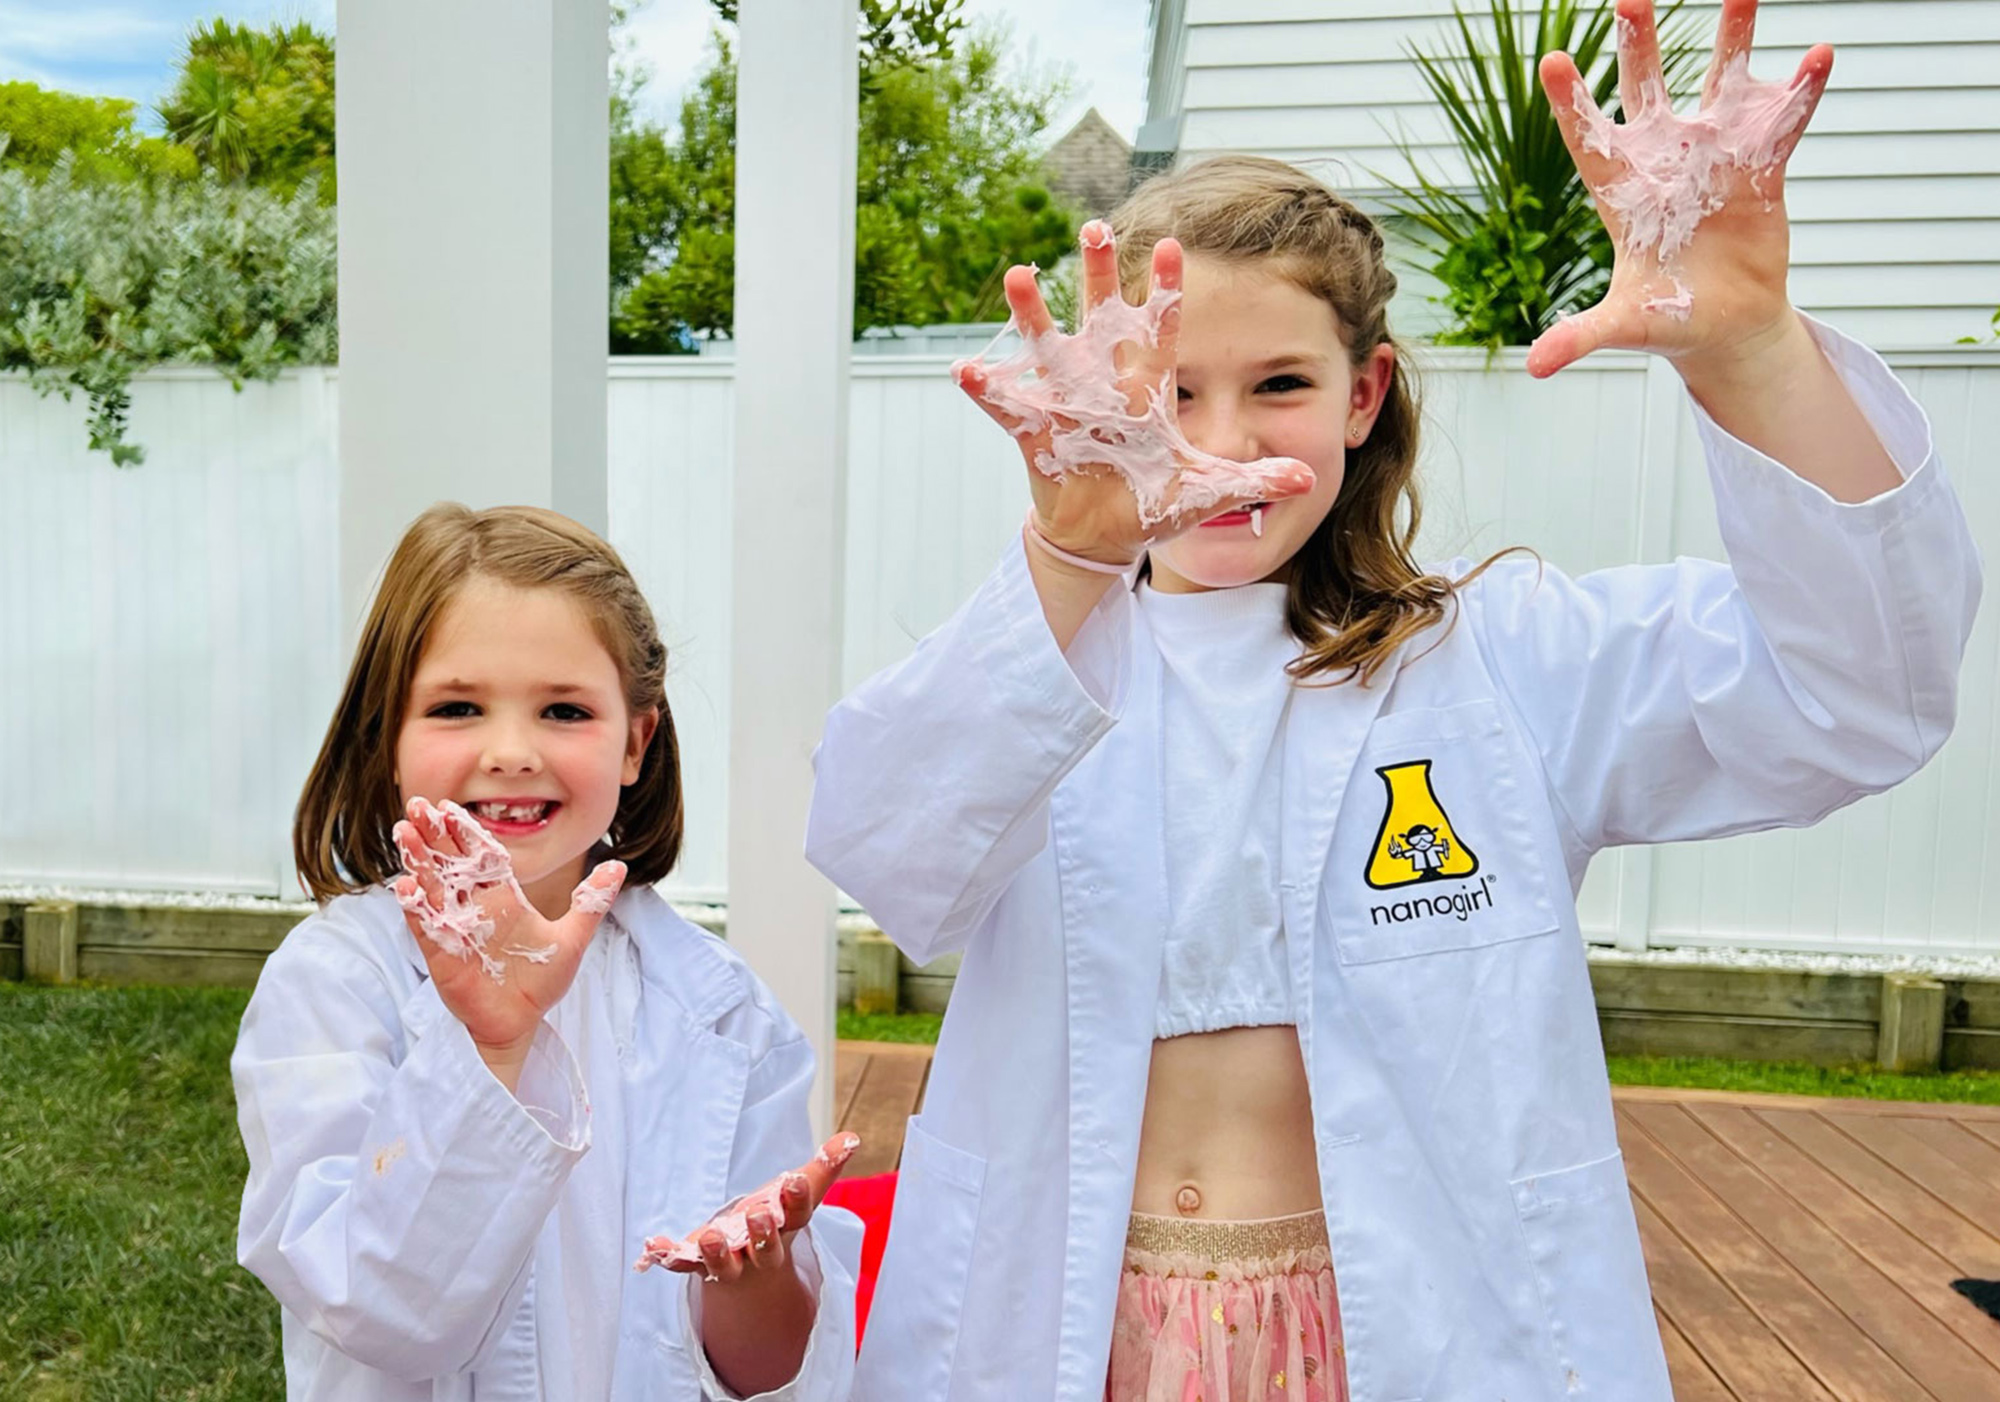 Girls play with slime at nanogirl birthday party